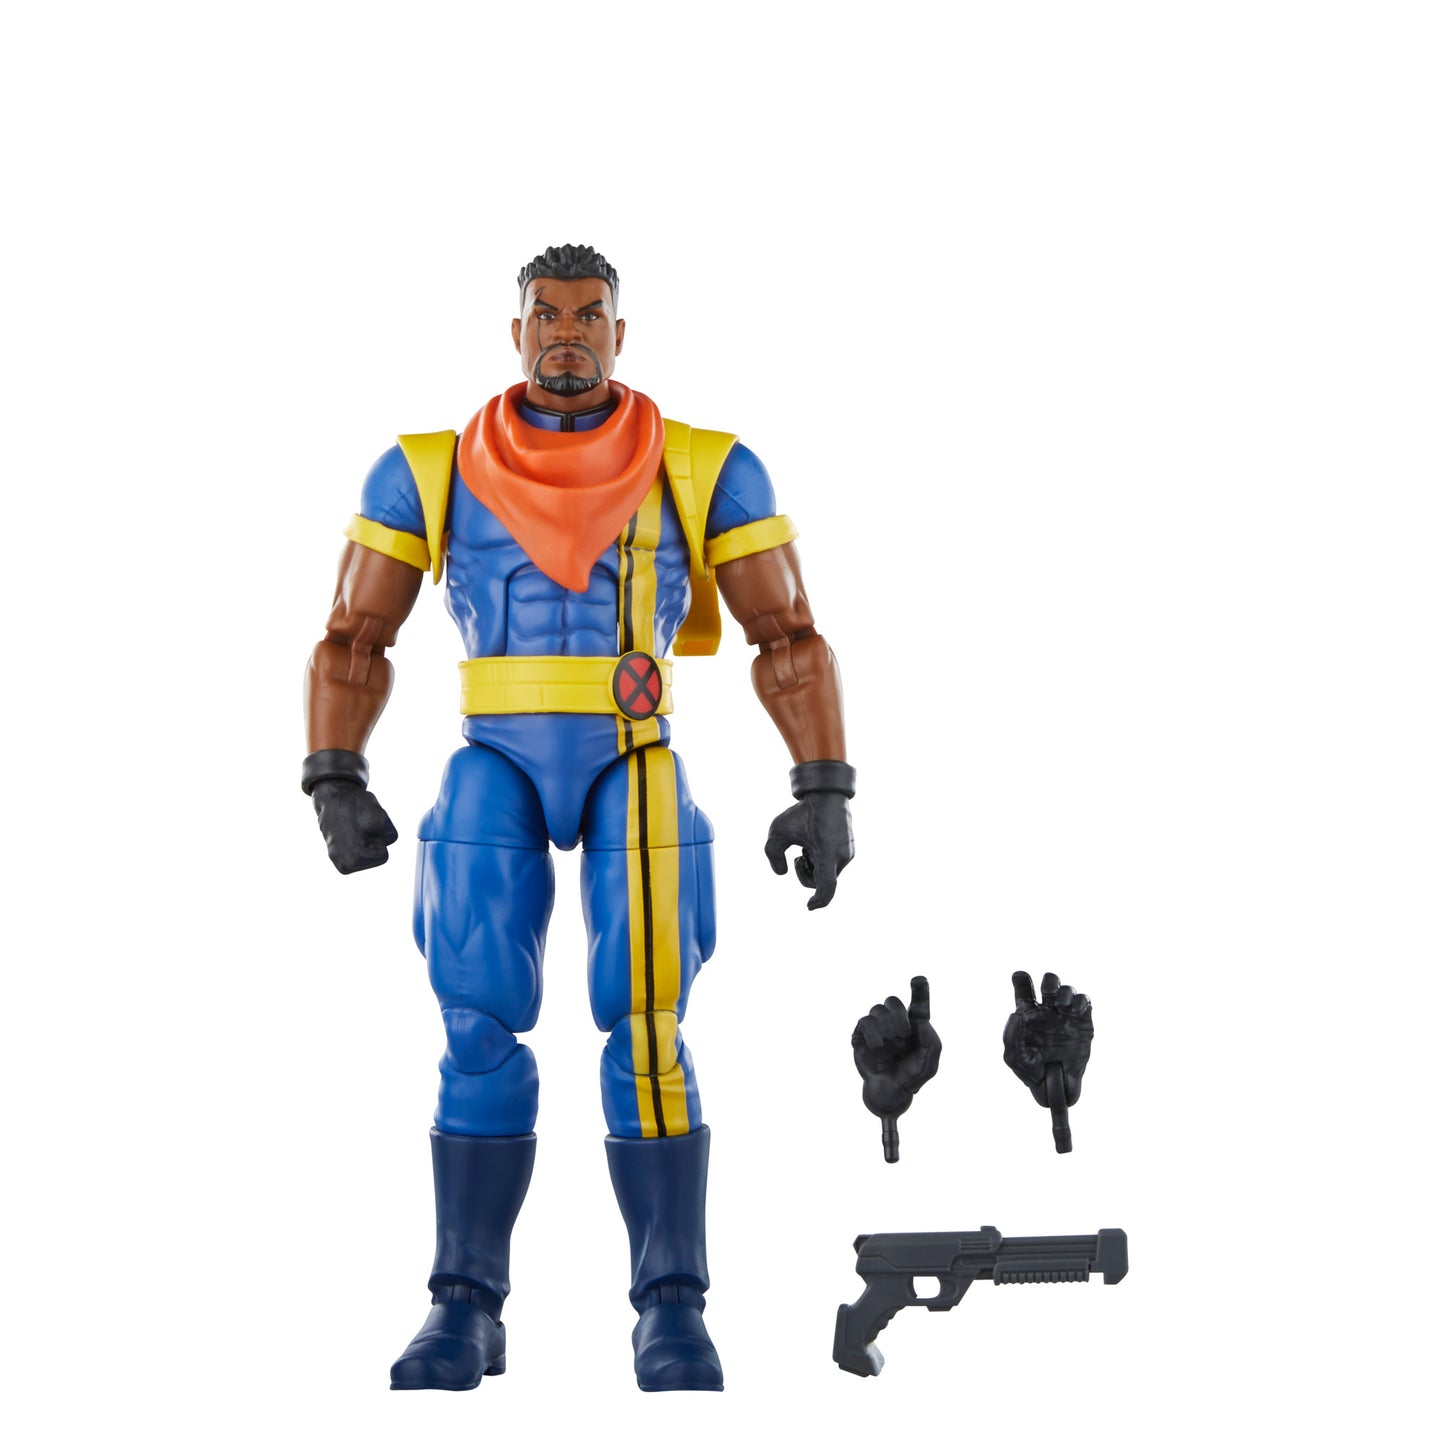 Hasbro Marvel Legends Series Marvel’s Bishop Action Figure Toy with accessories - Heretoserveyou